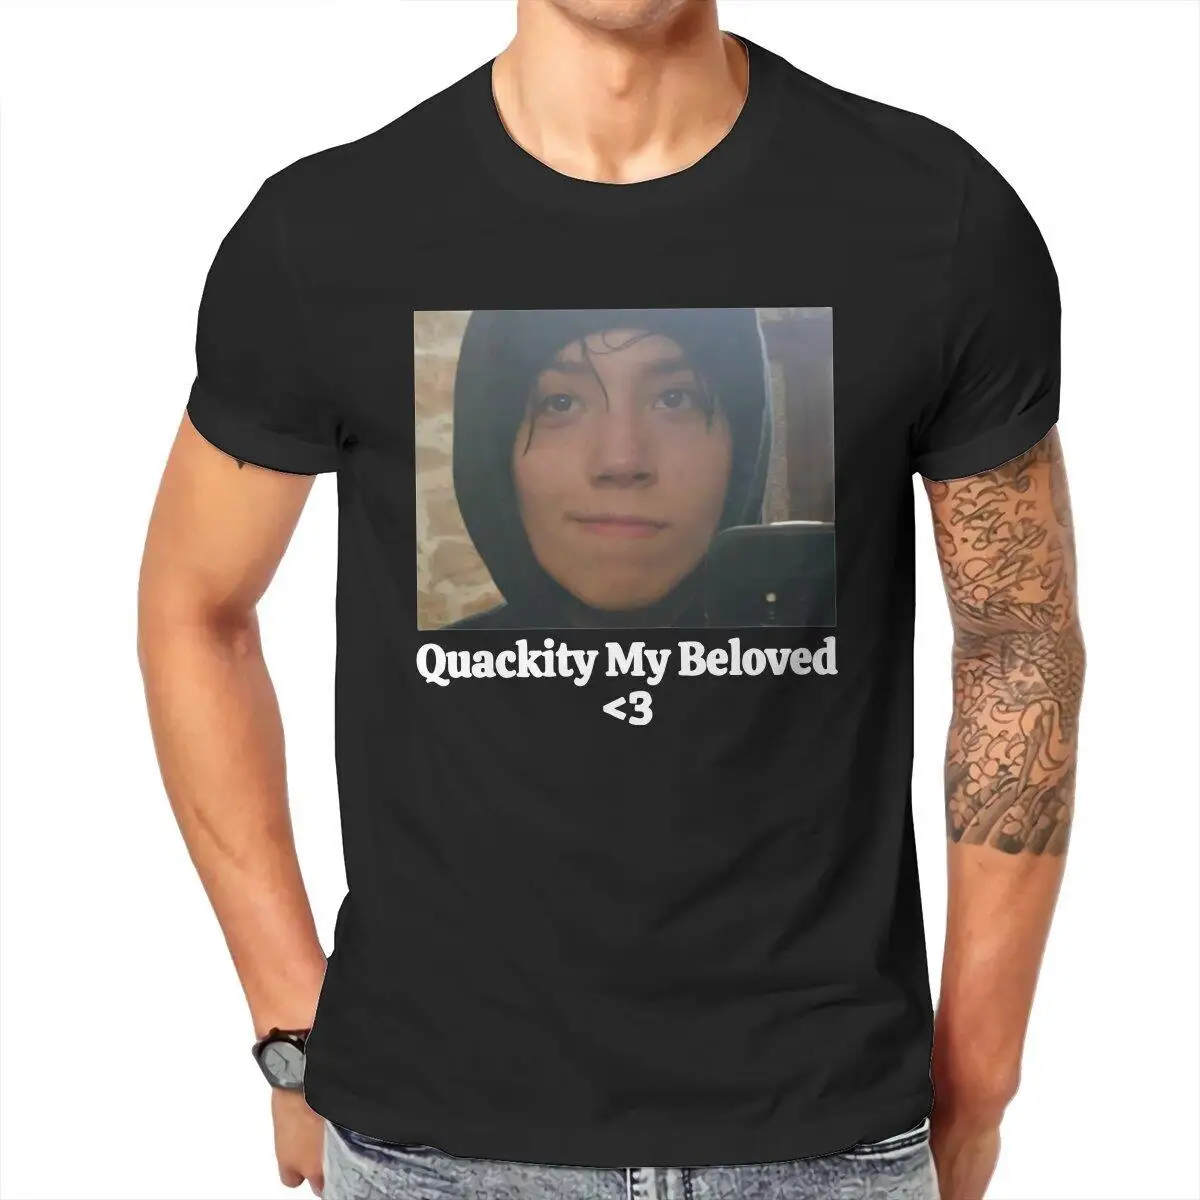 Quackity My Beloved Karl  T-Shirts for Men Crew Neck 100% Cotton T Shirt Gamer Short Sleeve Tee Shirt Plus Size Clothing